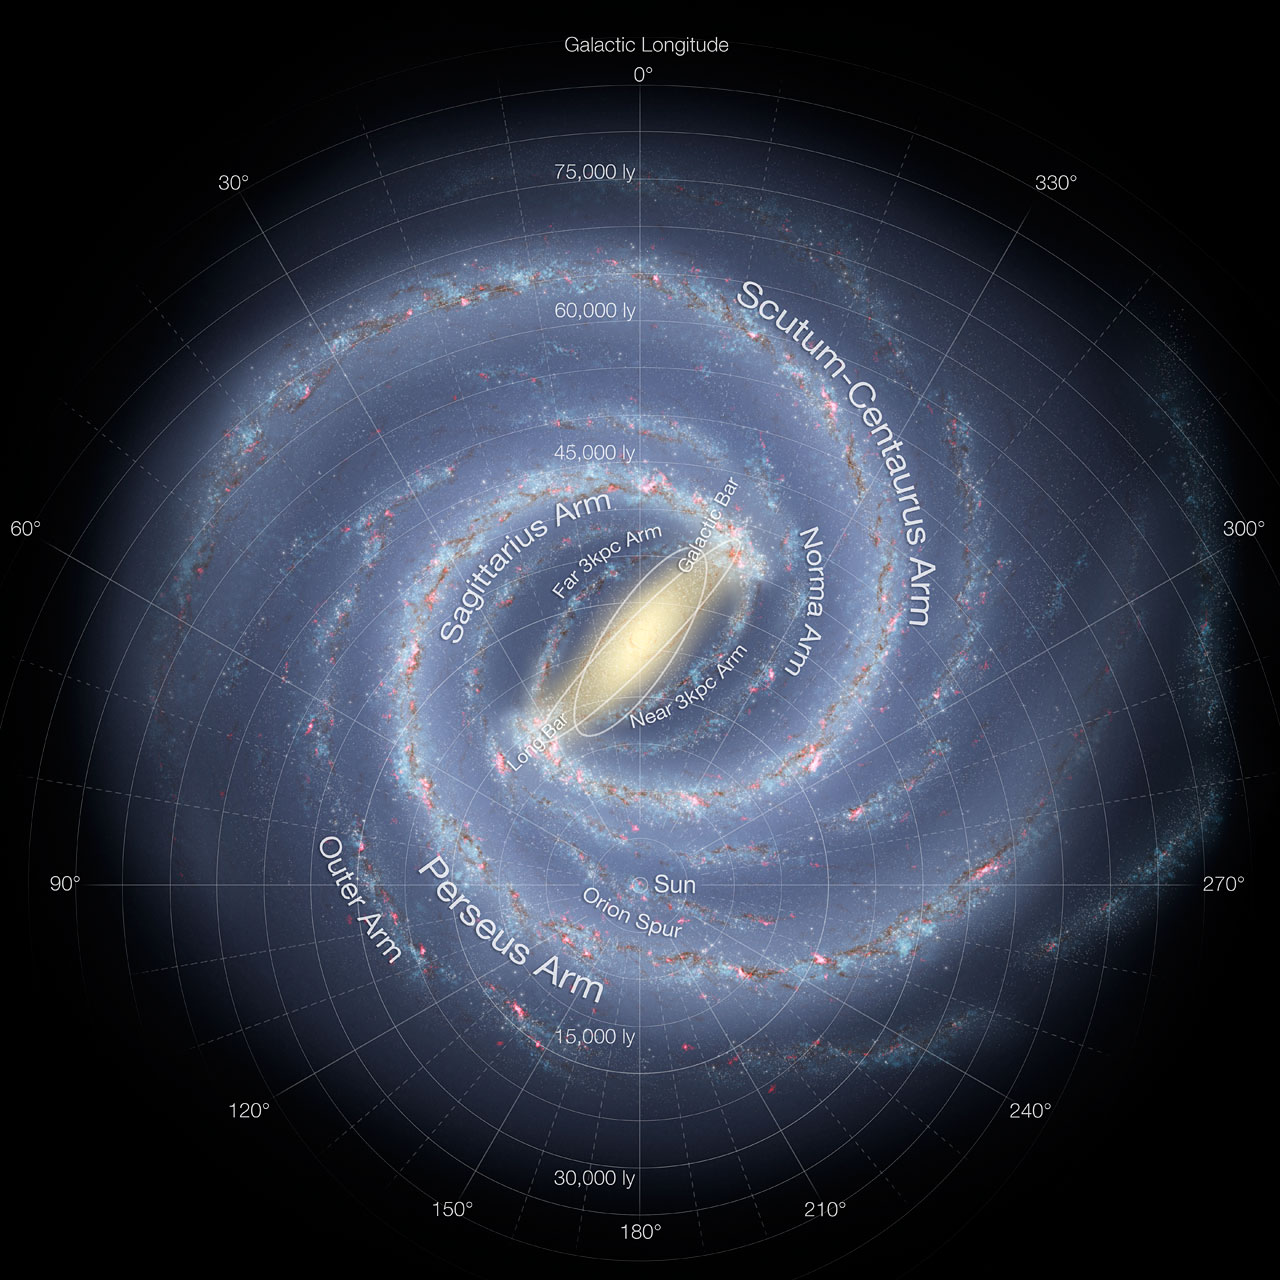 eso1339e Have we found the Milky Way’s twin?